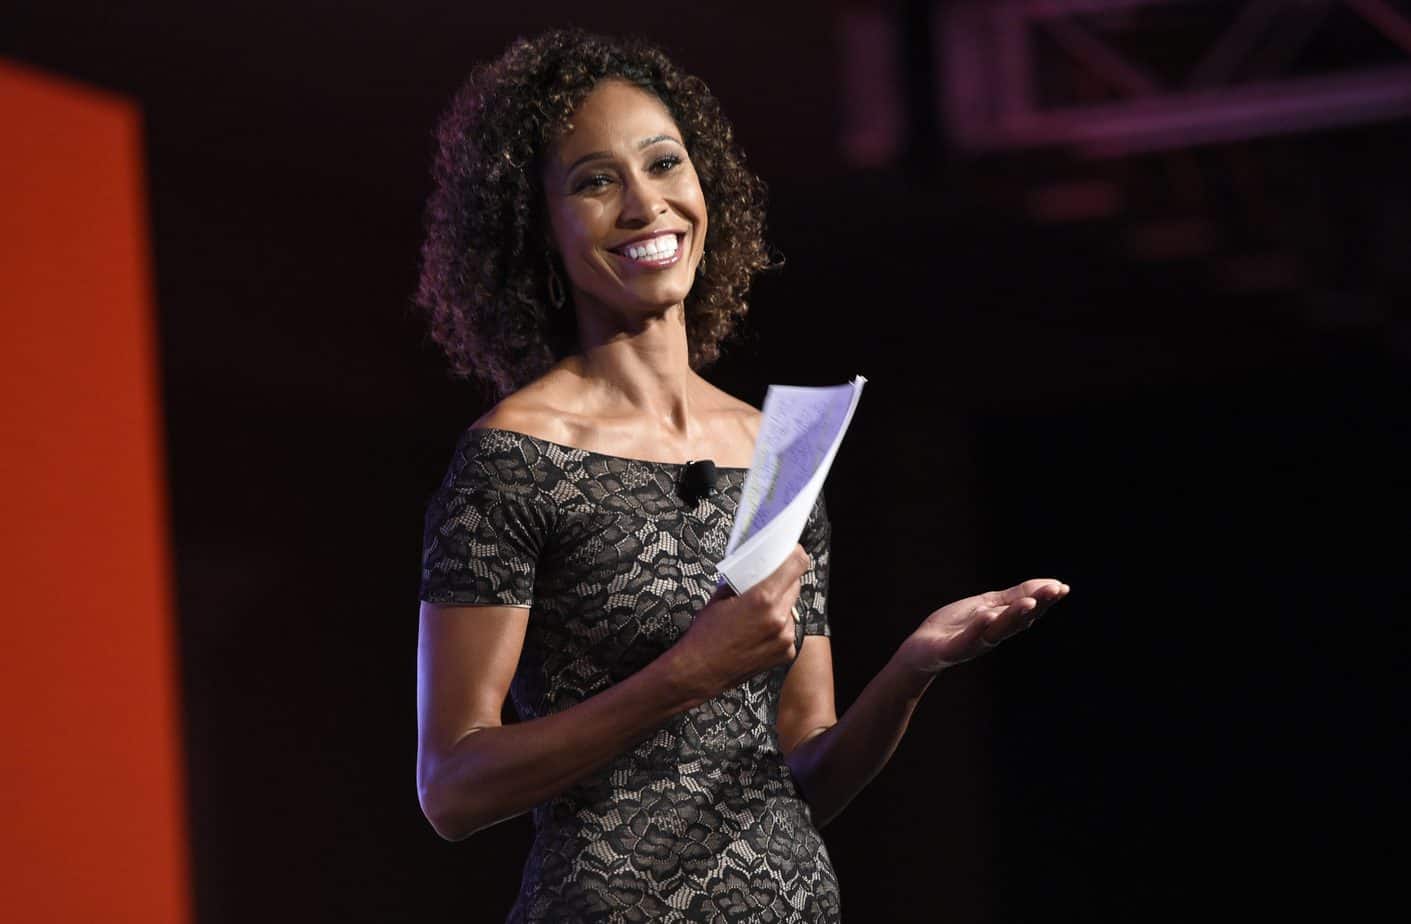 Former Bachelorette Rachel Lindsay revealed that ESPN anchor Sage Steele gave her heavy praise for picking a white man at the end of the show